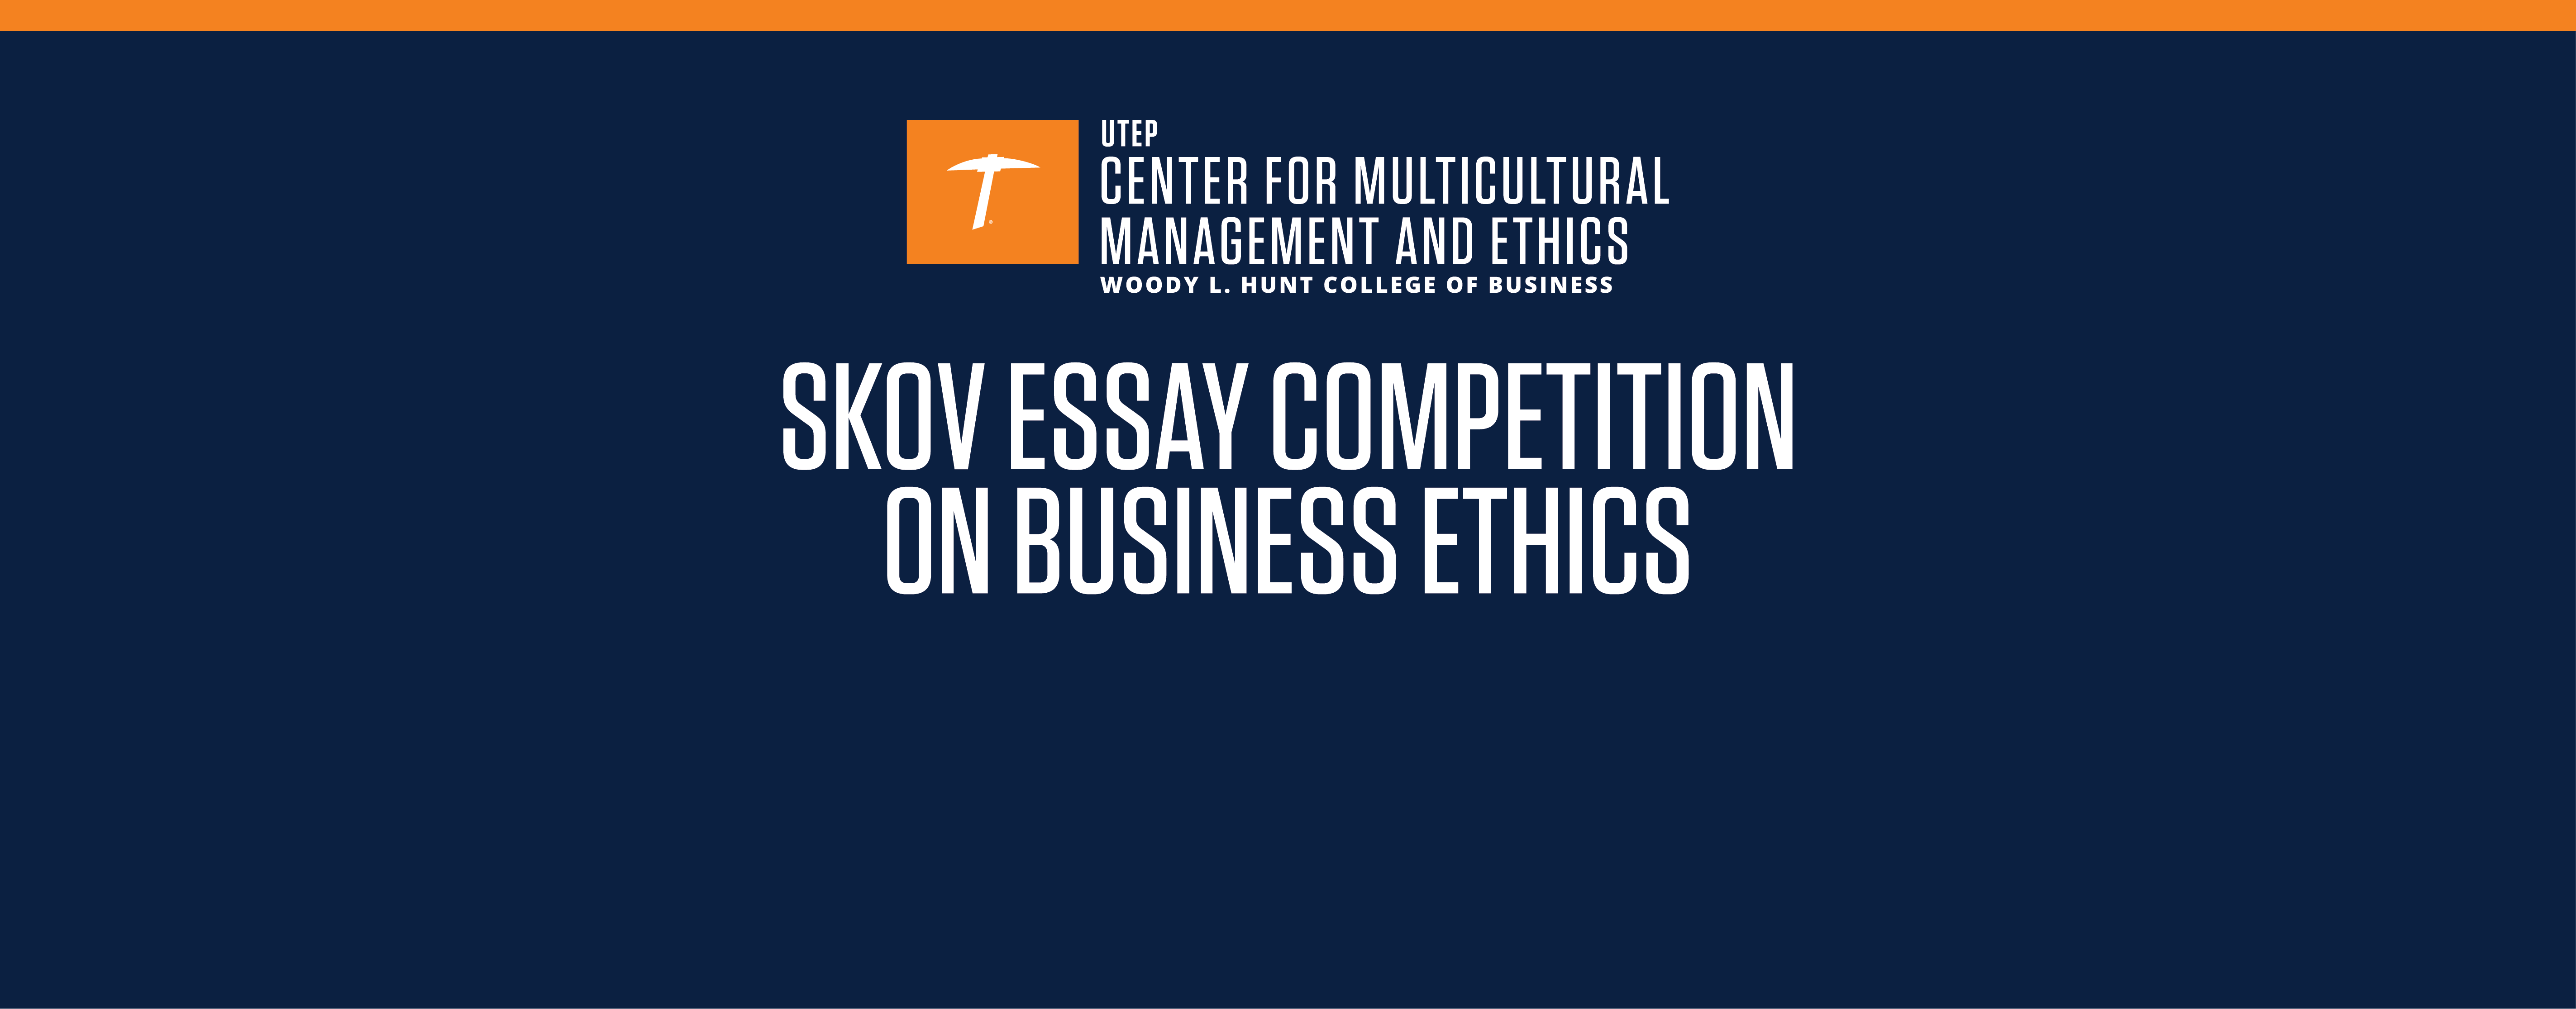 Write about ethics, win prize money! 